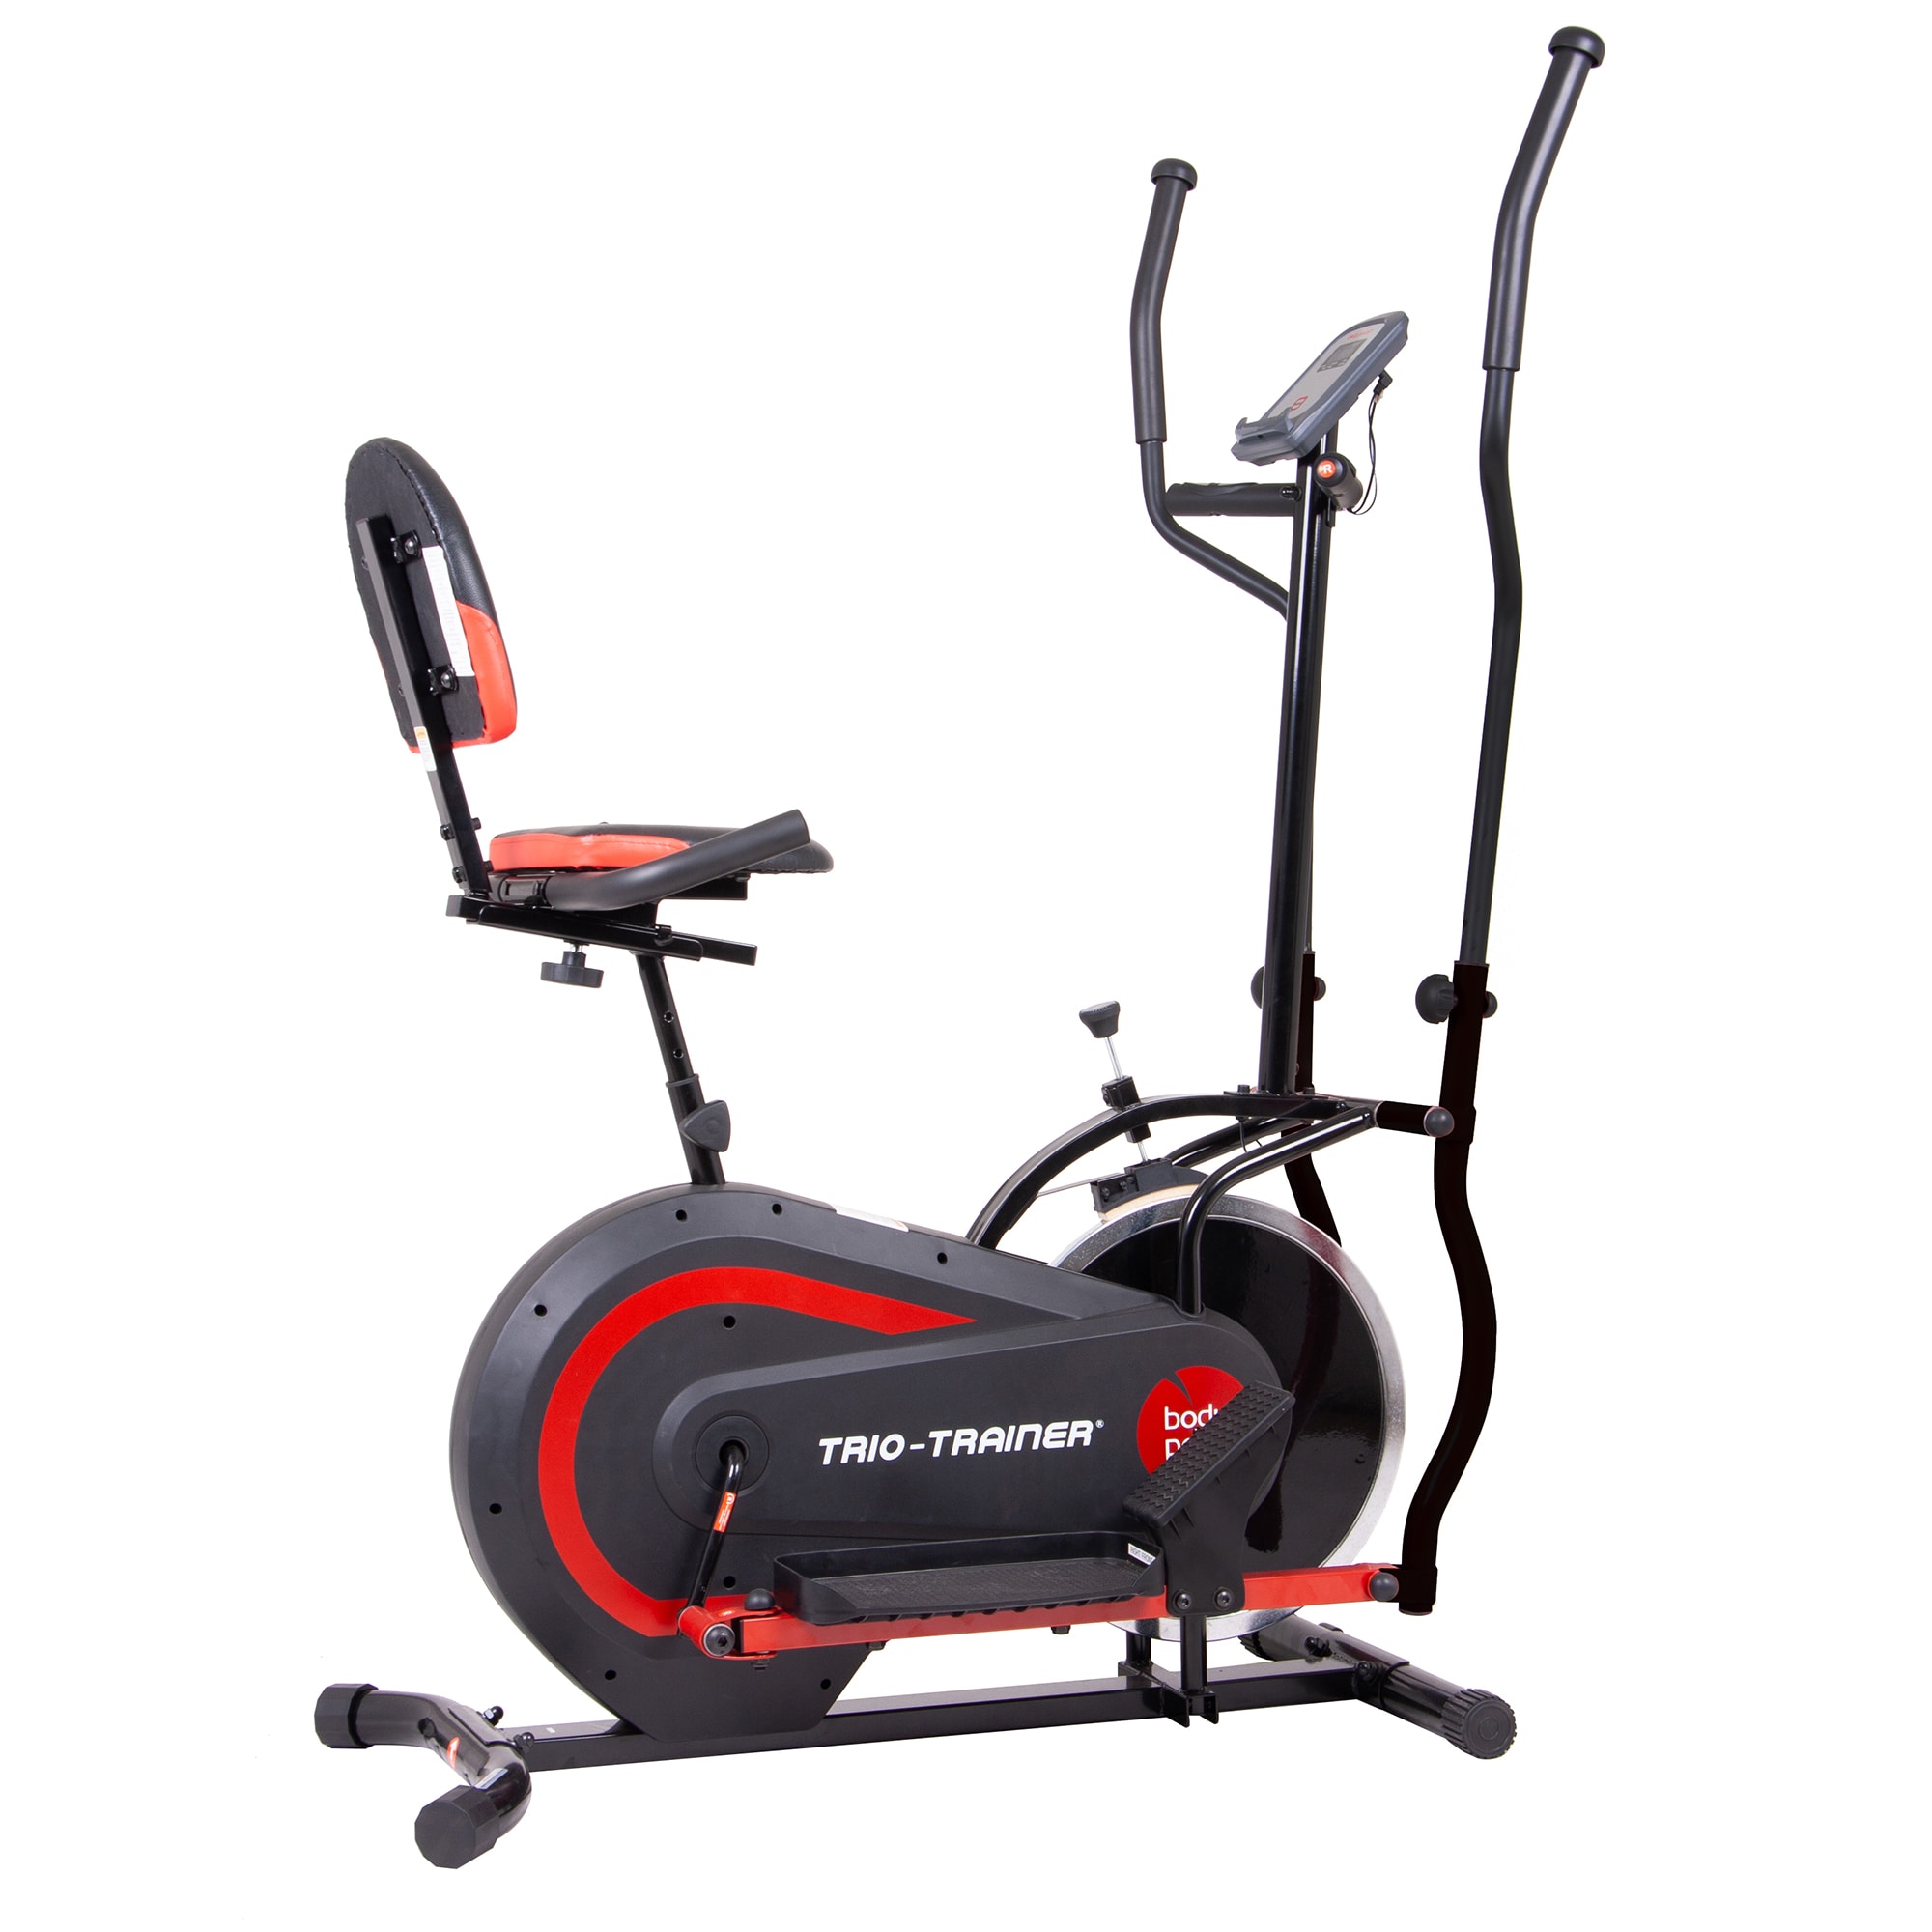 Diplomatie Opgetild voorspelling Body Flex Sports Body Power Fly Wheel Resistance Cross-trainer Elliptical in  the Ellipticals & Striders department at Lowes.com